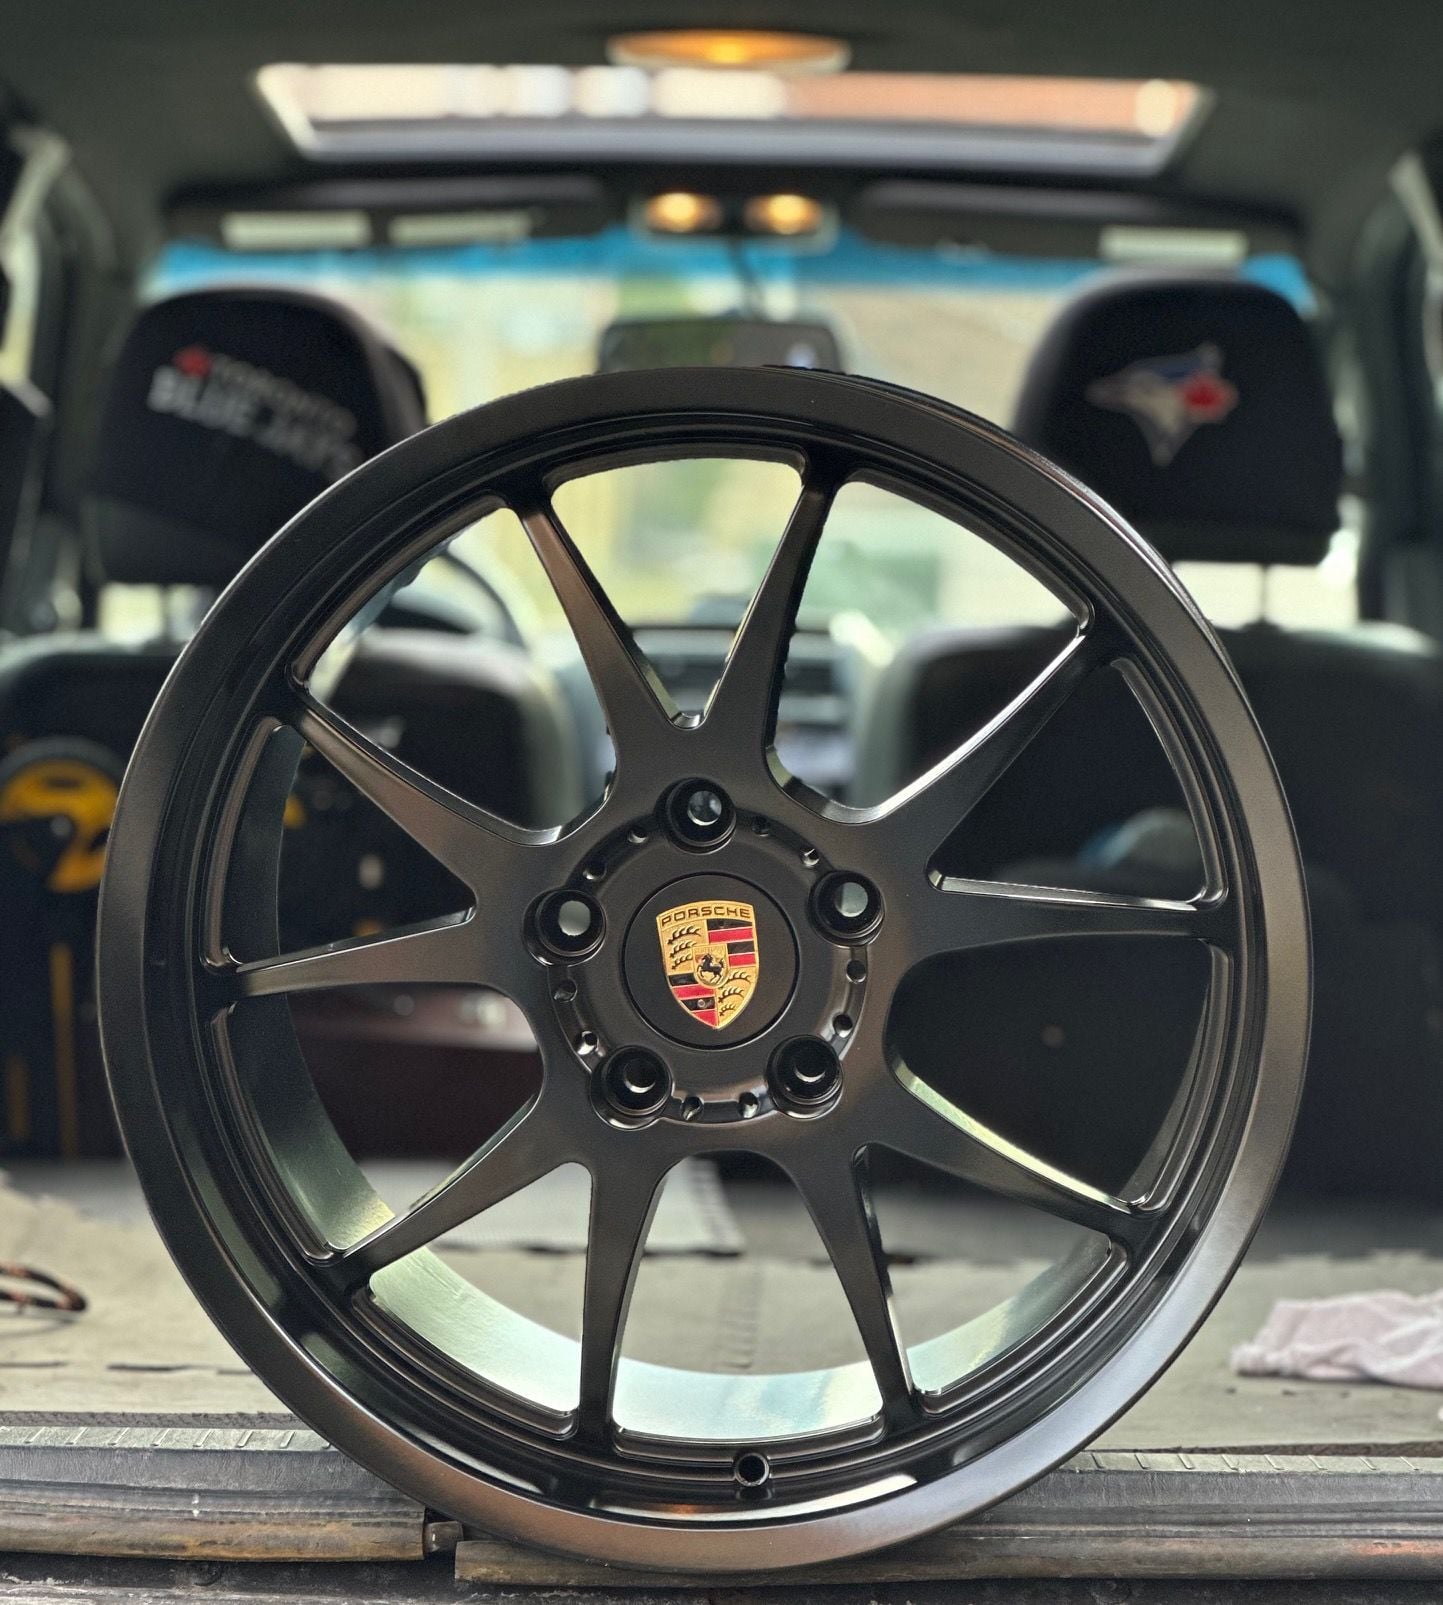 2016 Porsche 911 - 19" Forged Wheels for Cayman / Boxster - Accessories - $2,350 - Niagara Falls, NY 14304, United States